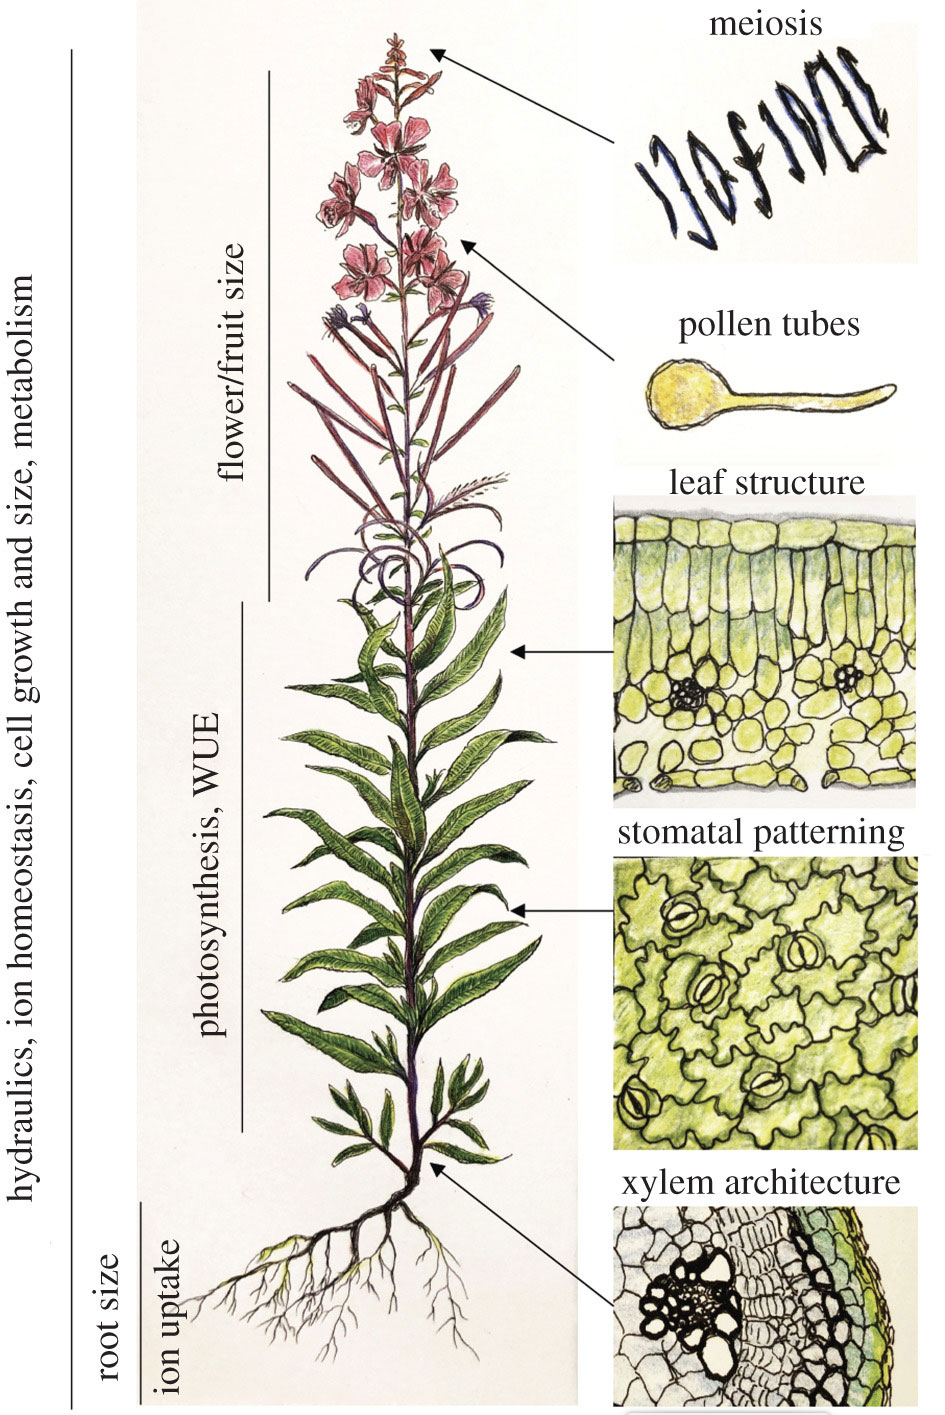 <i>Summary of some of the major changes associated with WGD in plants. Illustrations by Prof. Kirsten Bomblies</i>